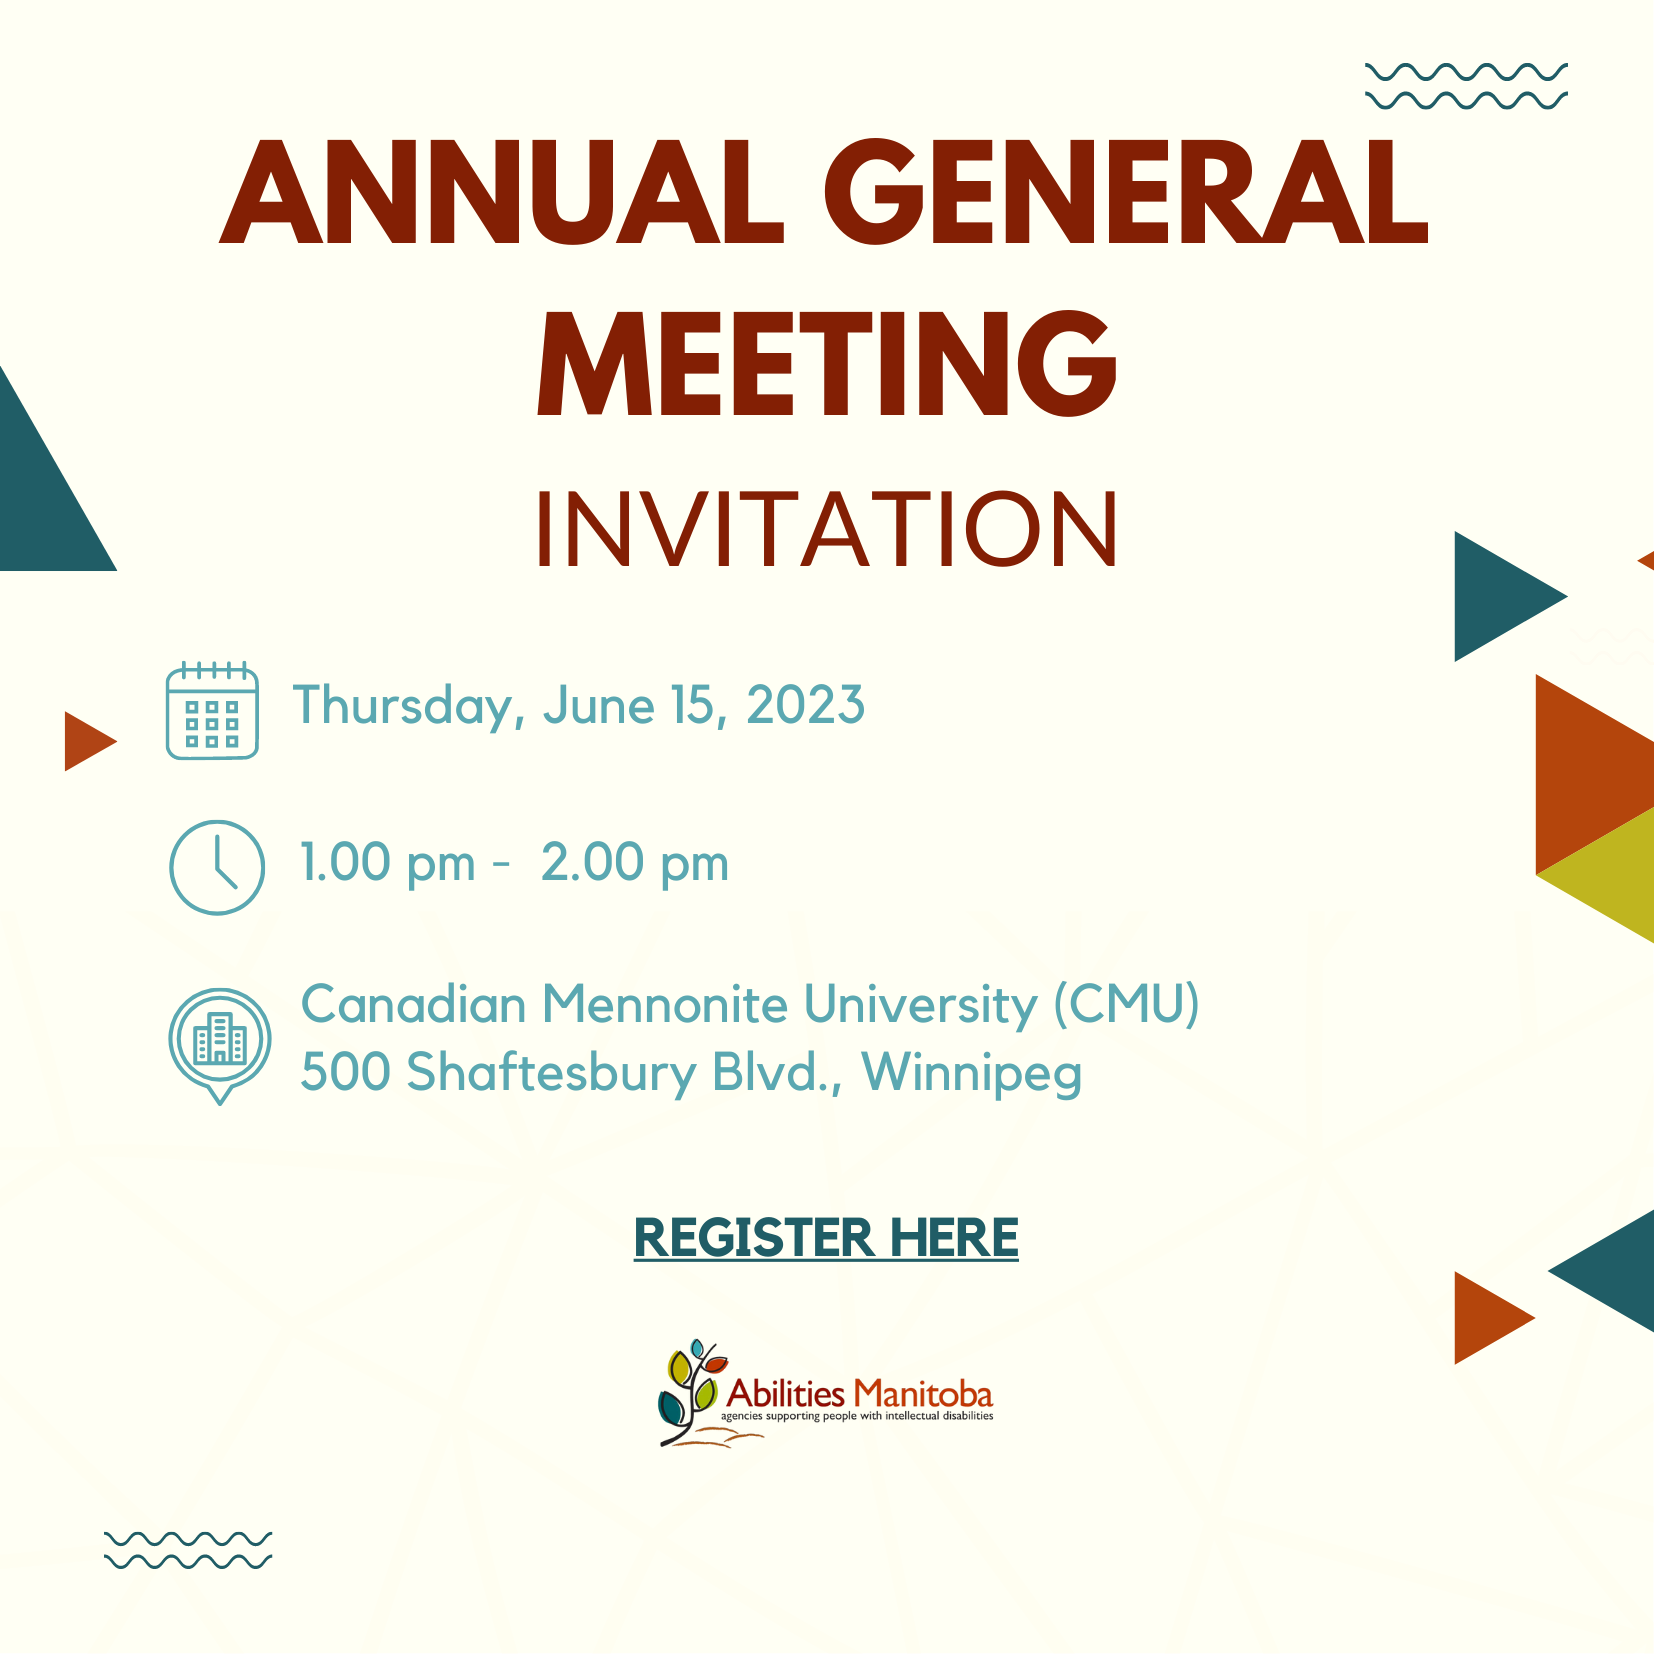 You're invited to our Annual General Meeting.